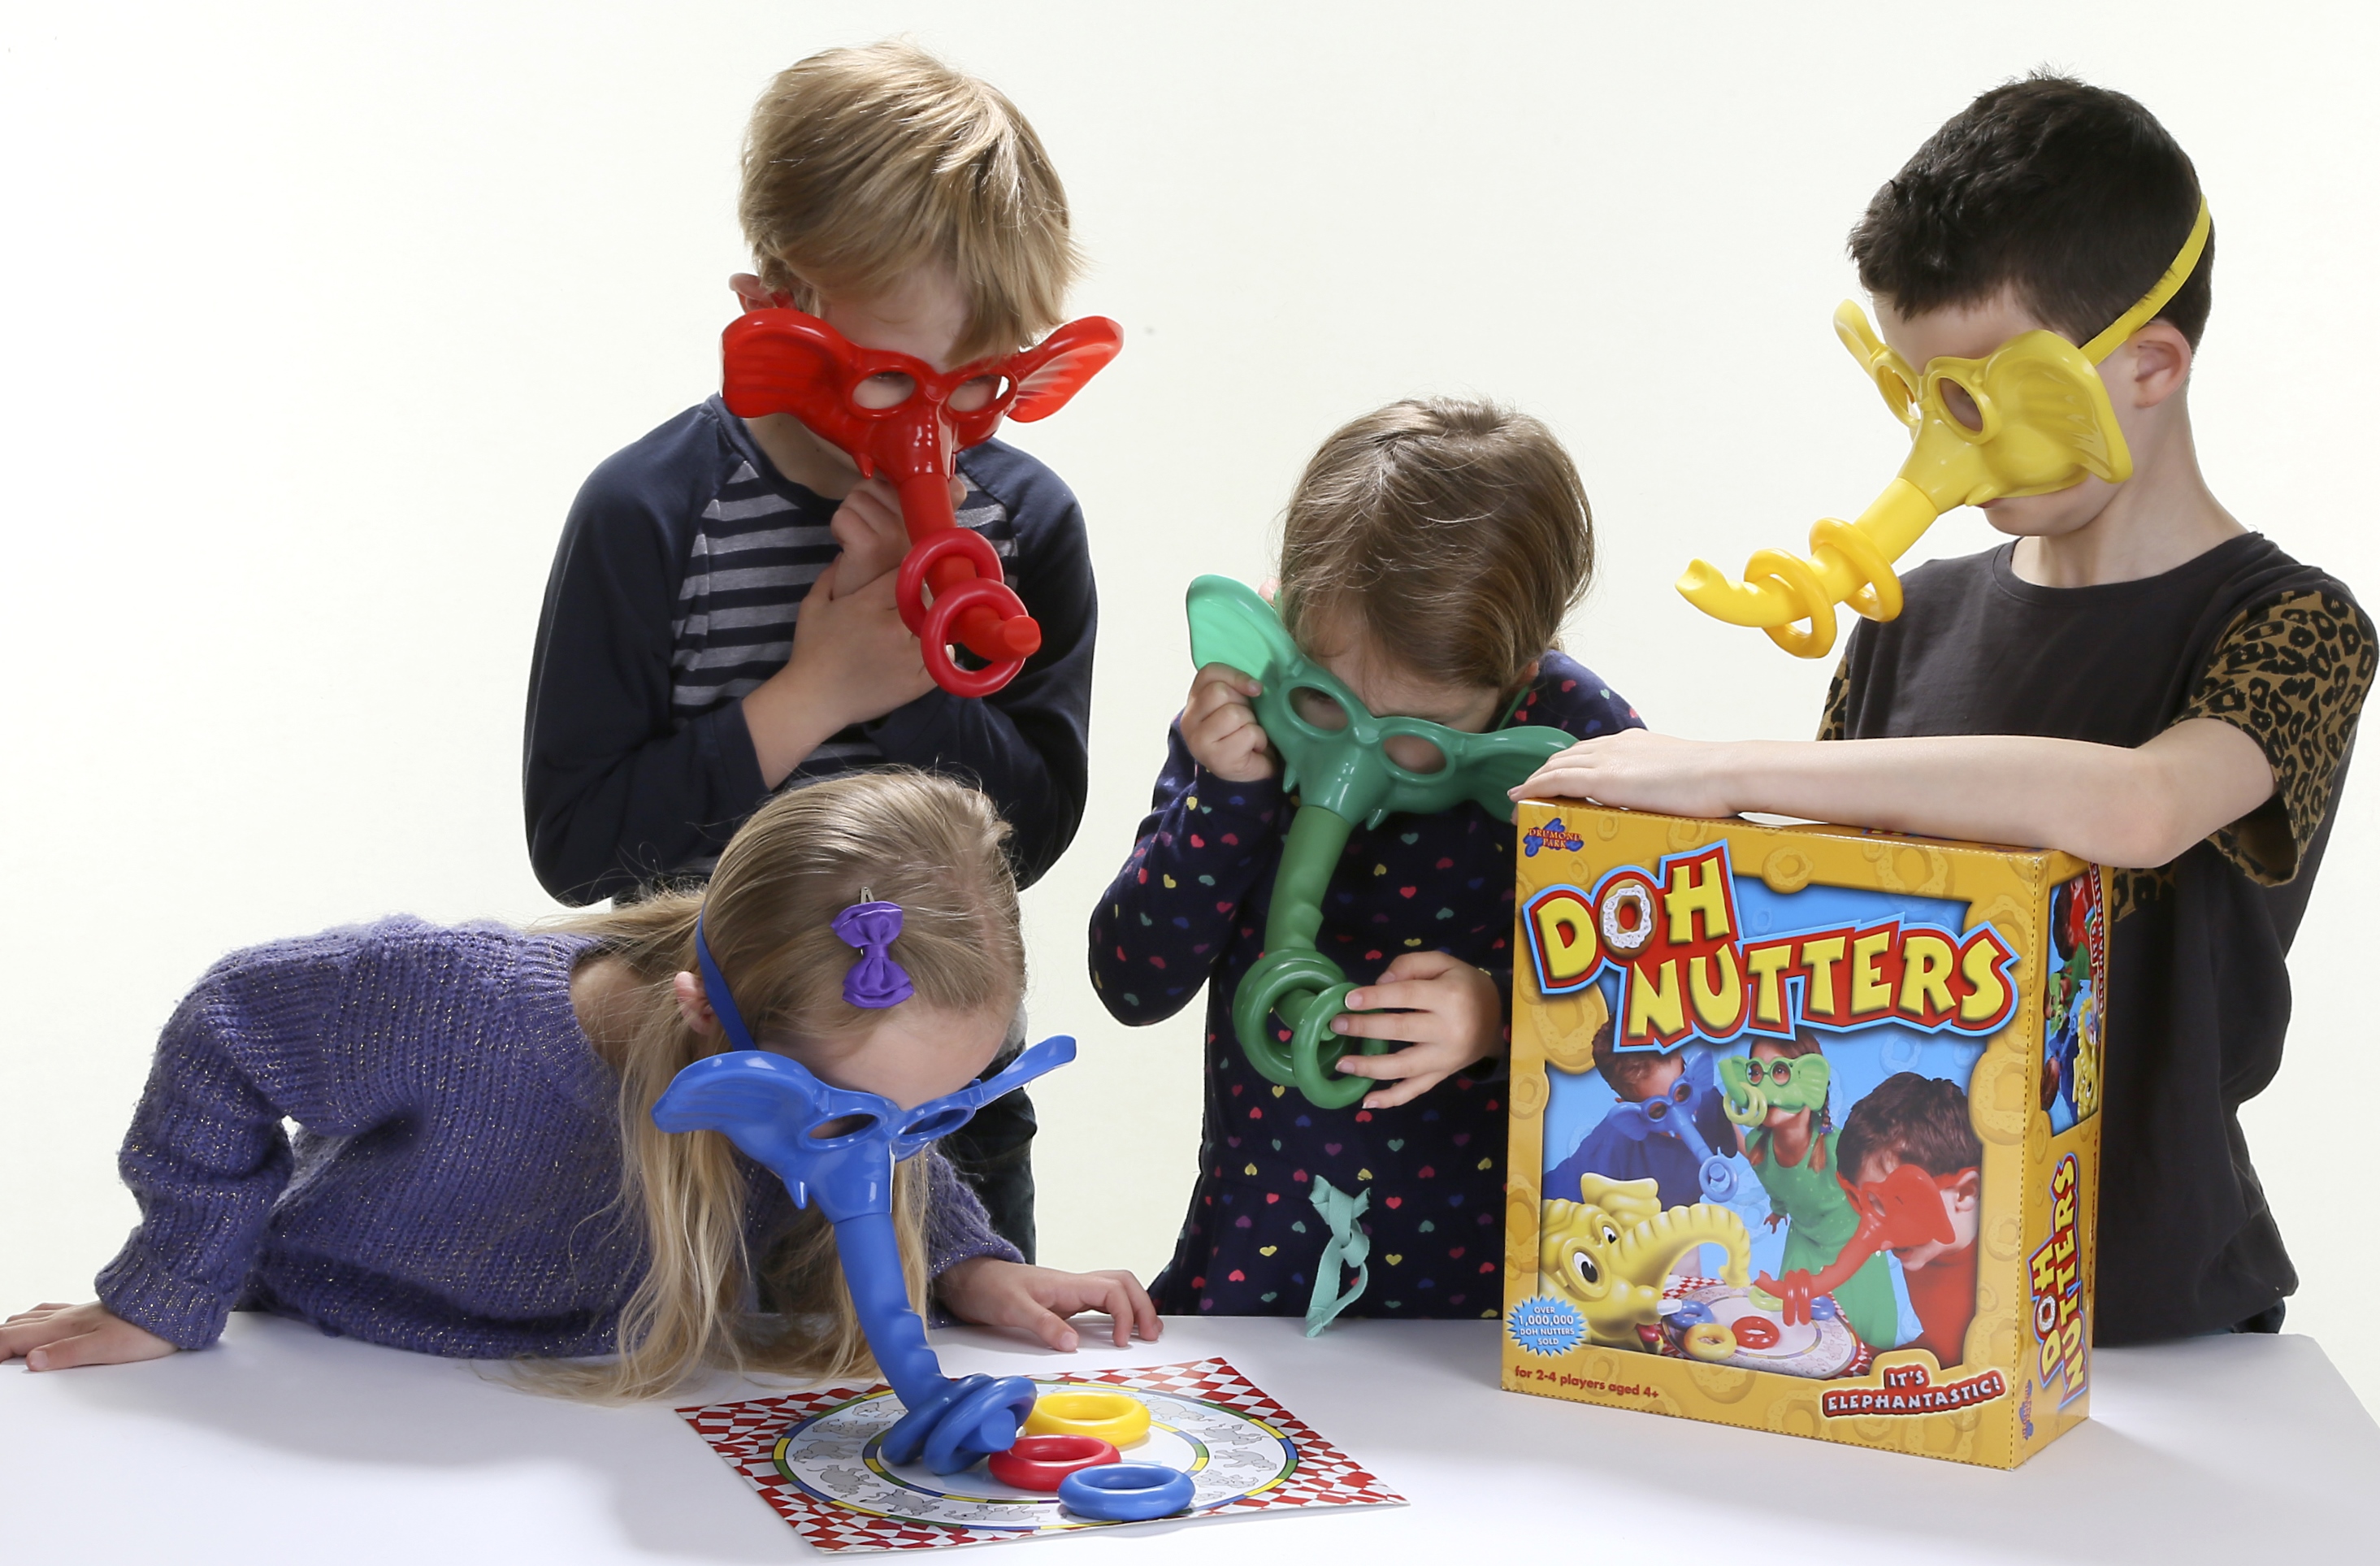 Doh Nutters – kids playing